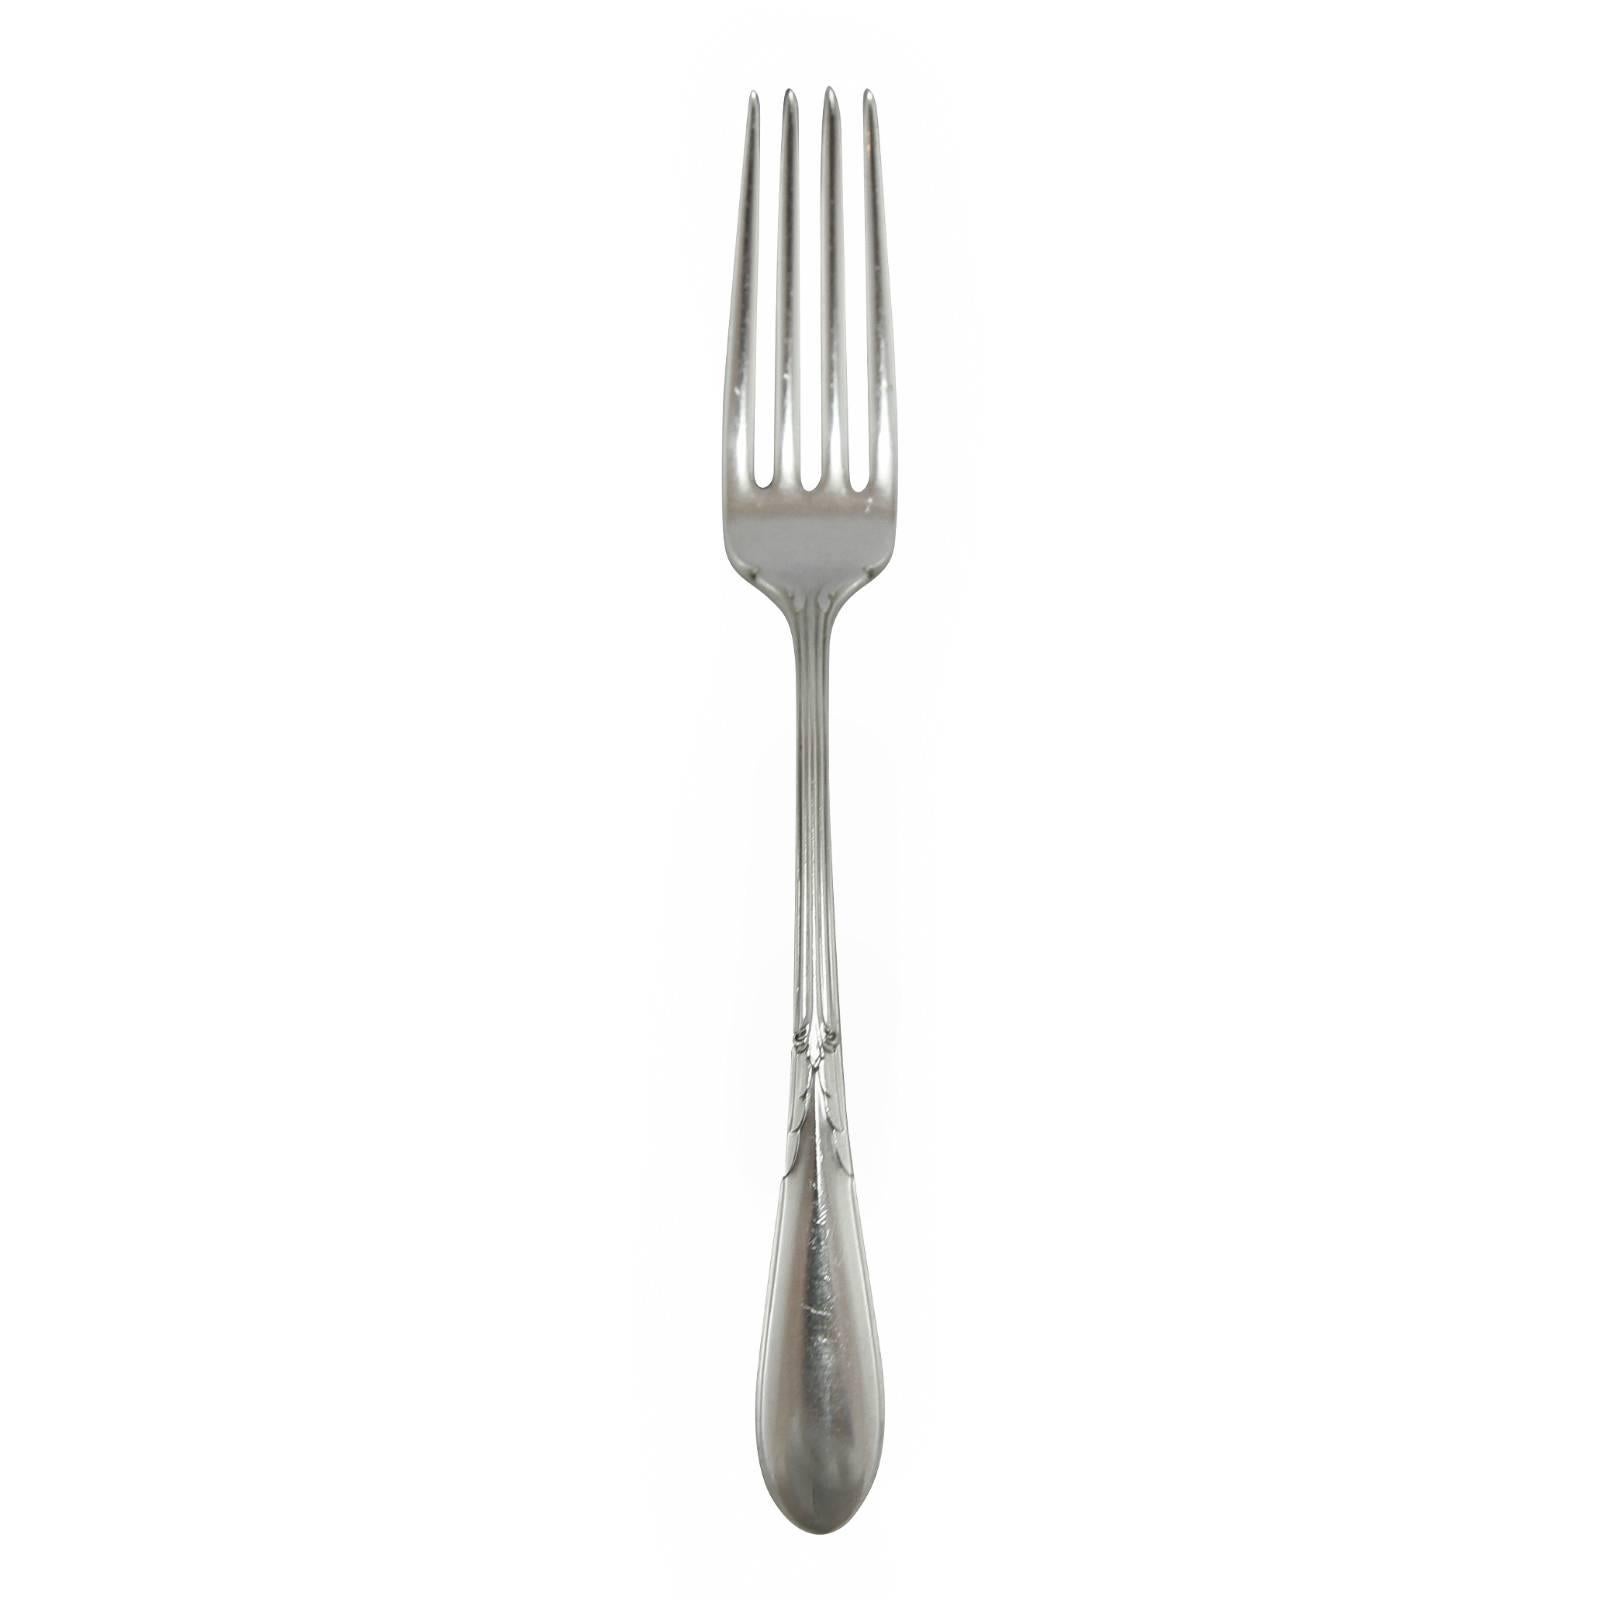 First produced in 1933, this elegant and refined set of sterling flatware captures the Art Deco era with its symmetrical streamlined decor. 

This 67 piece set contains:

12 main forks, 12 main knives, 12 tea spoons, 12 salad forks, seven butter